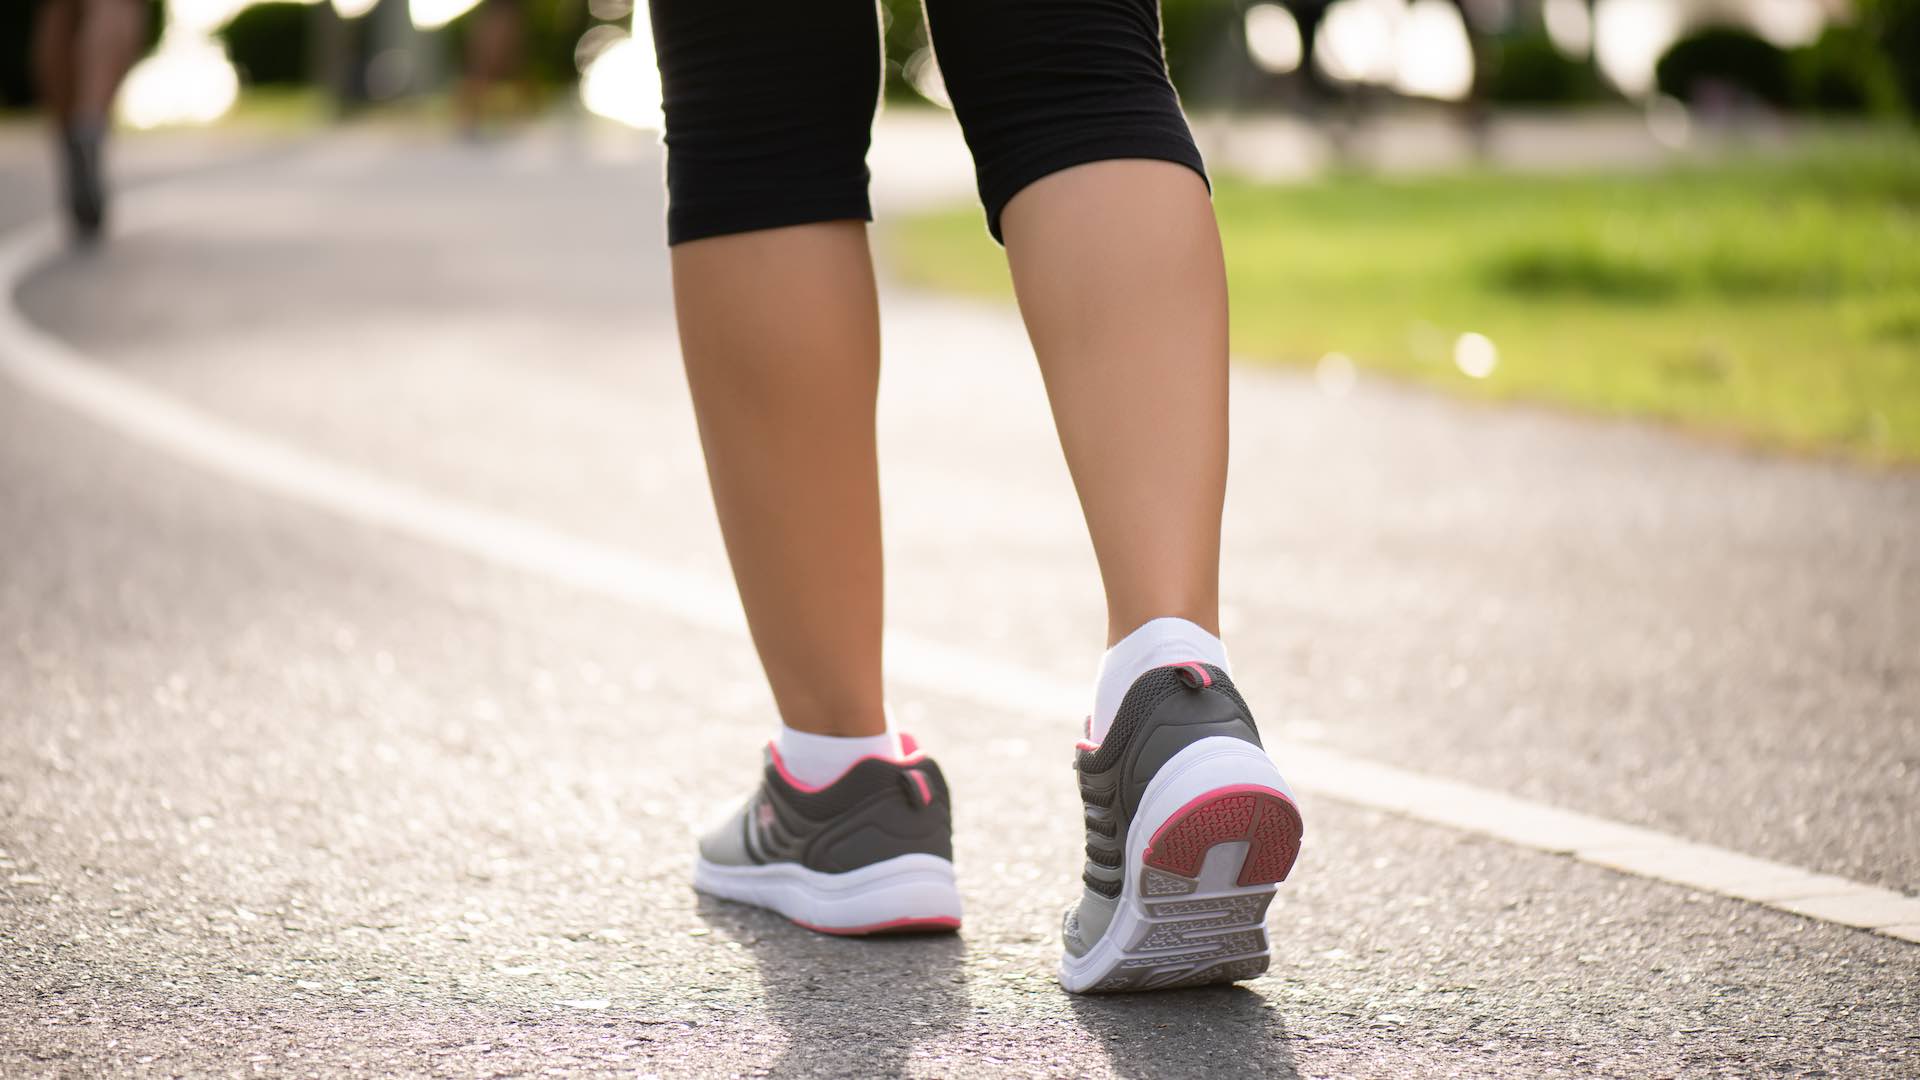 6,000 steps a day touted as new health benchmark